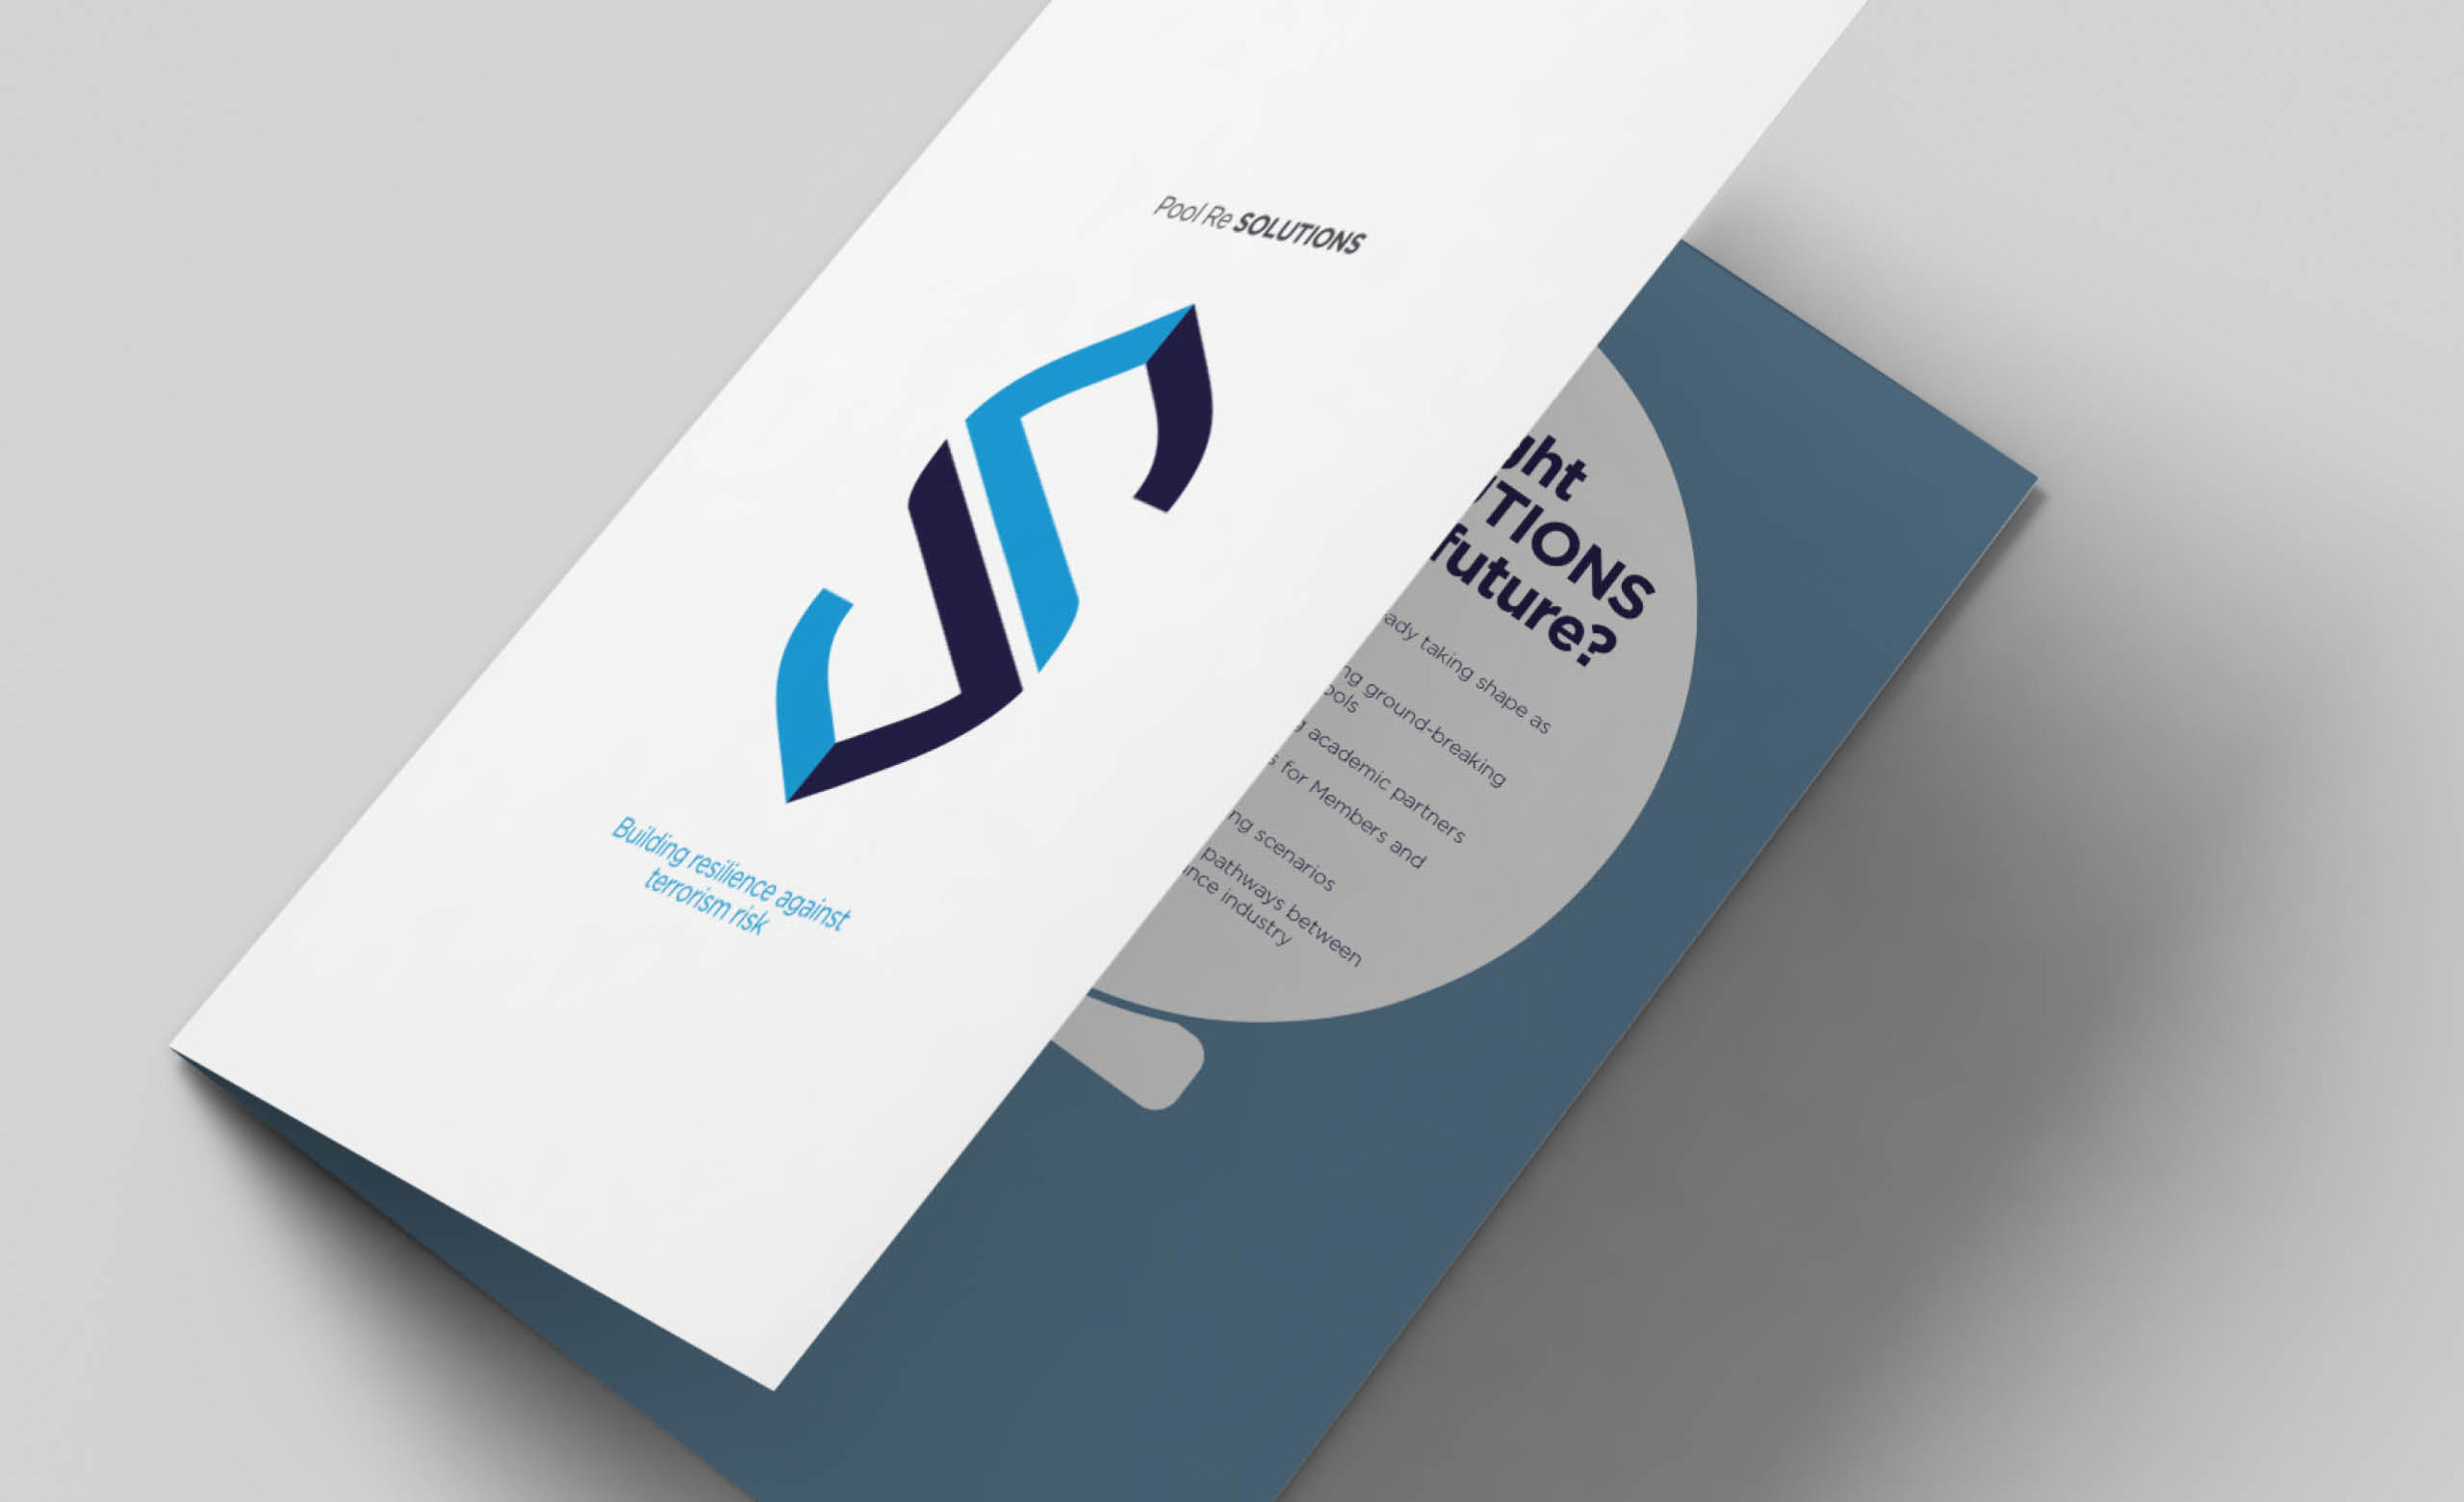 Pool Re Solutions marketing brochure, insurance marketing and design, information design